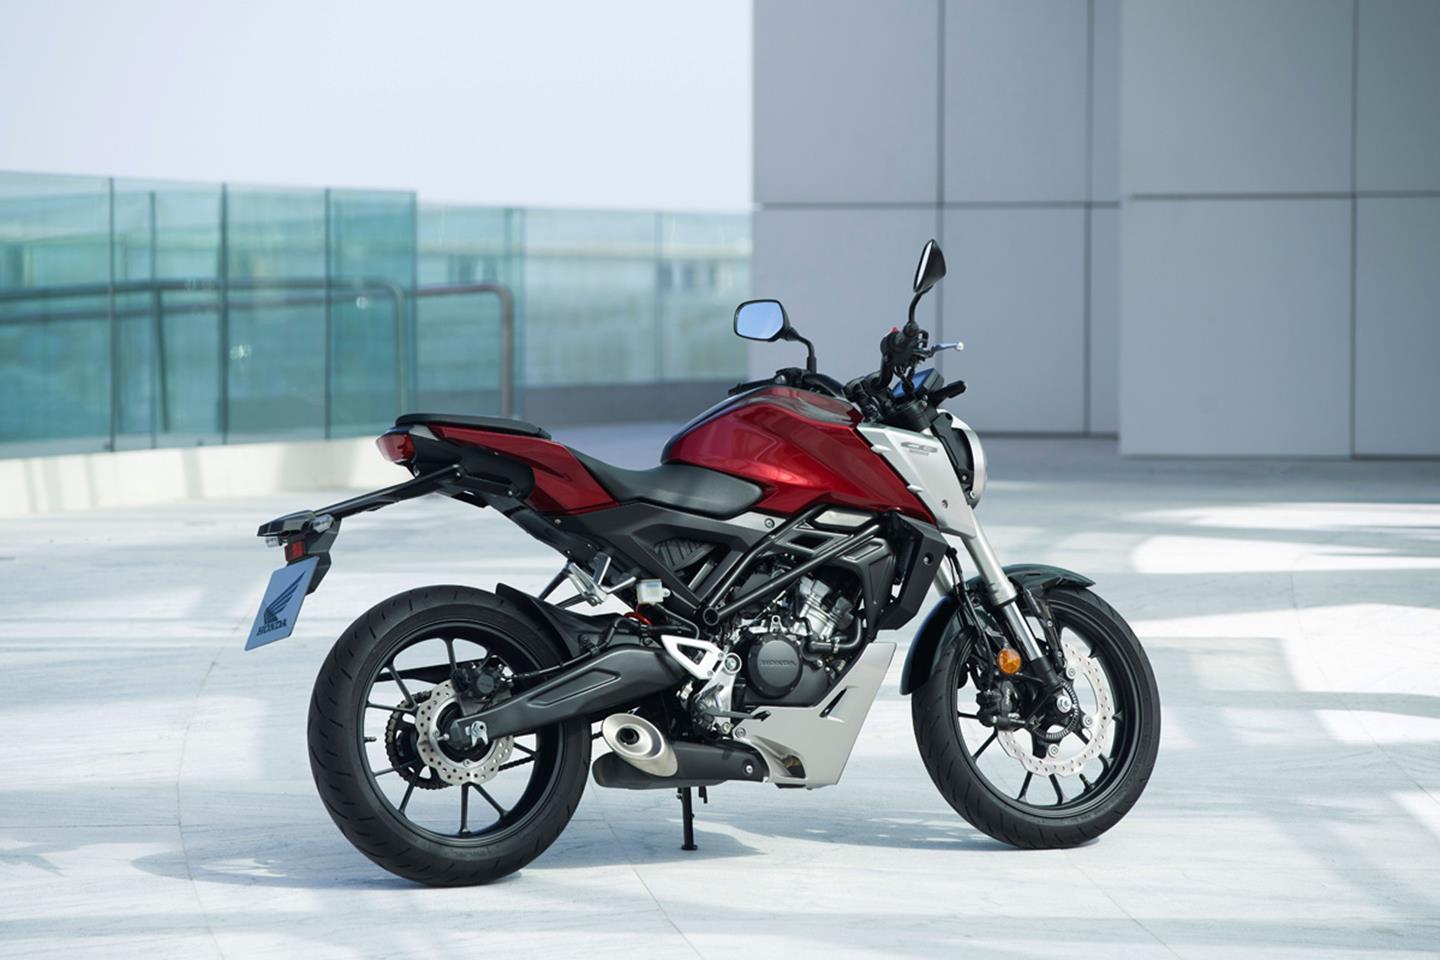 2023 Honda CB125R Specifications and Expected Price in India